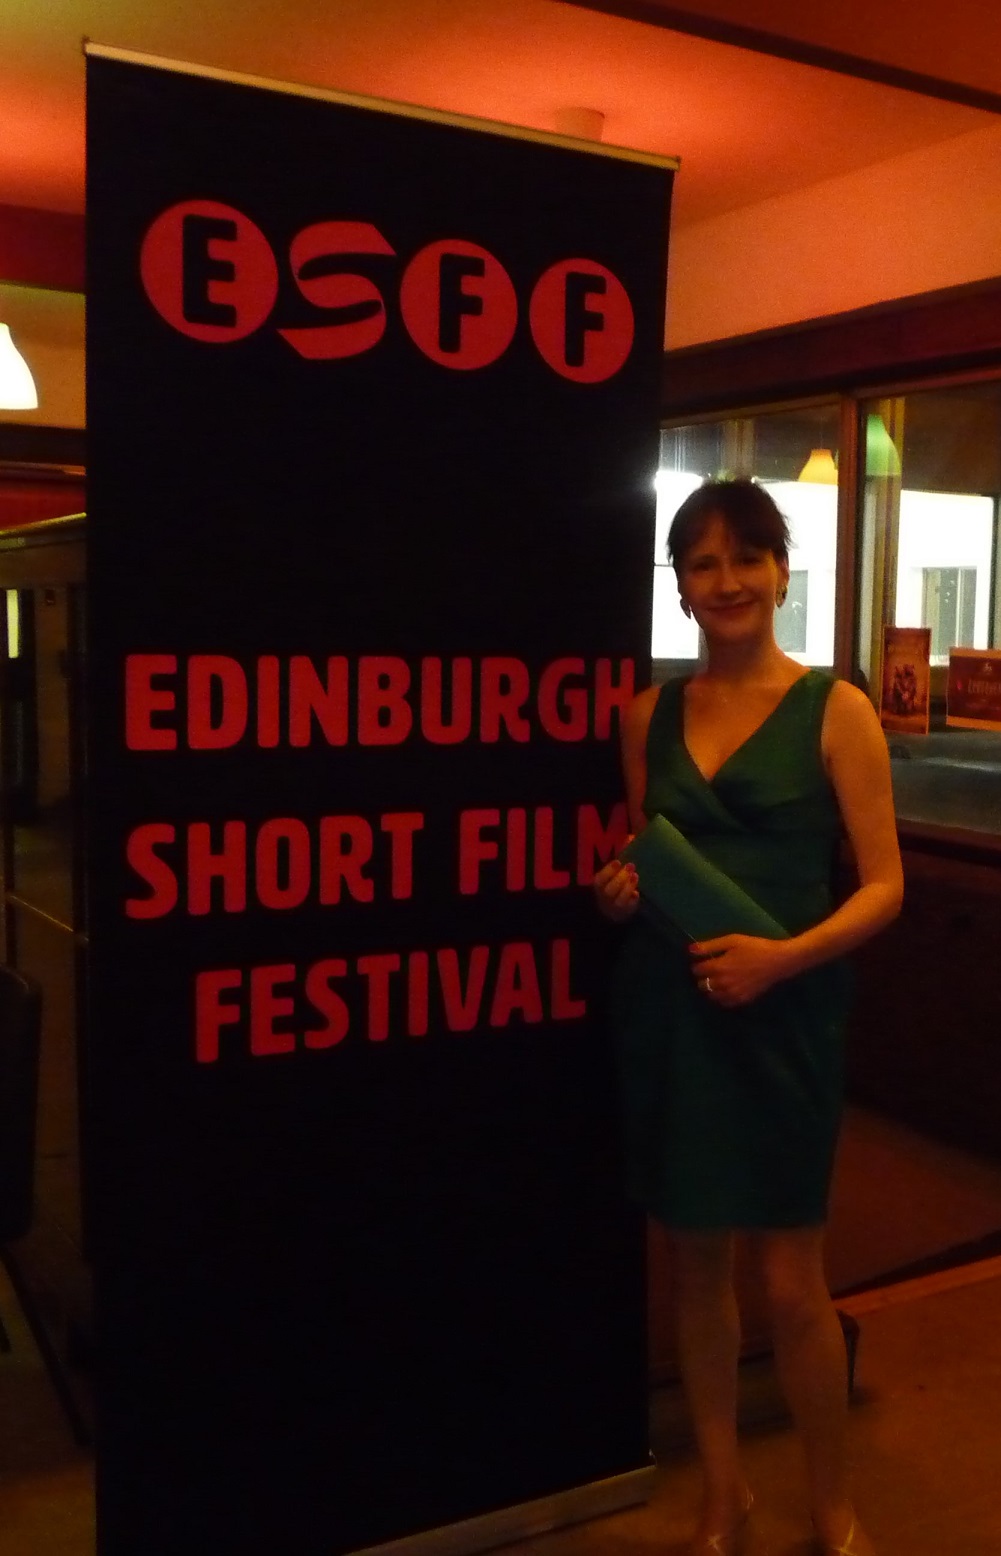 At Edinburgh Short Film Festival where 'Downsizer' was an Official Selection.